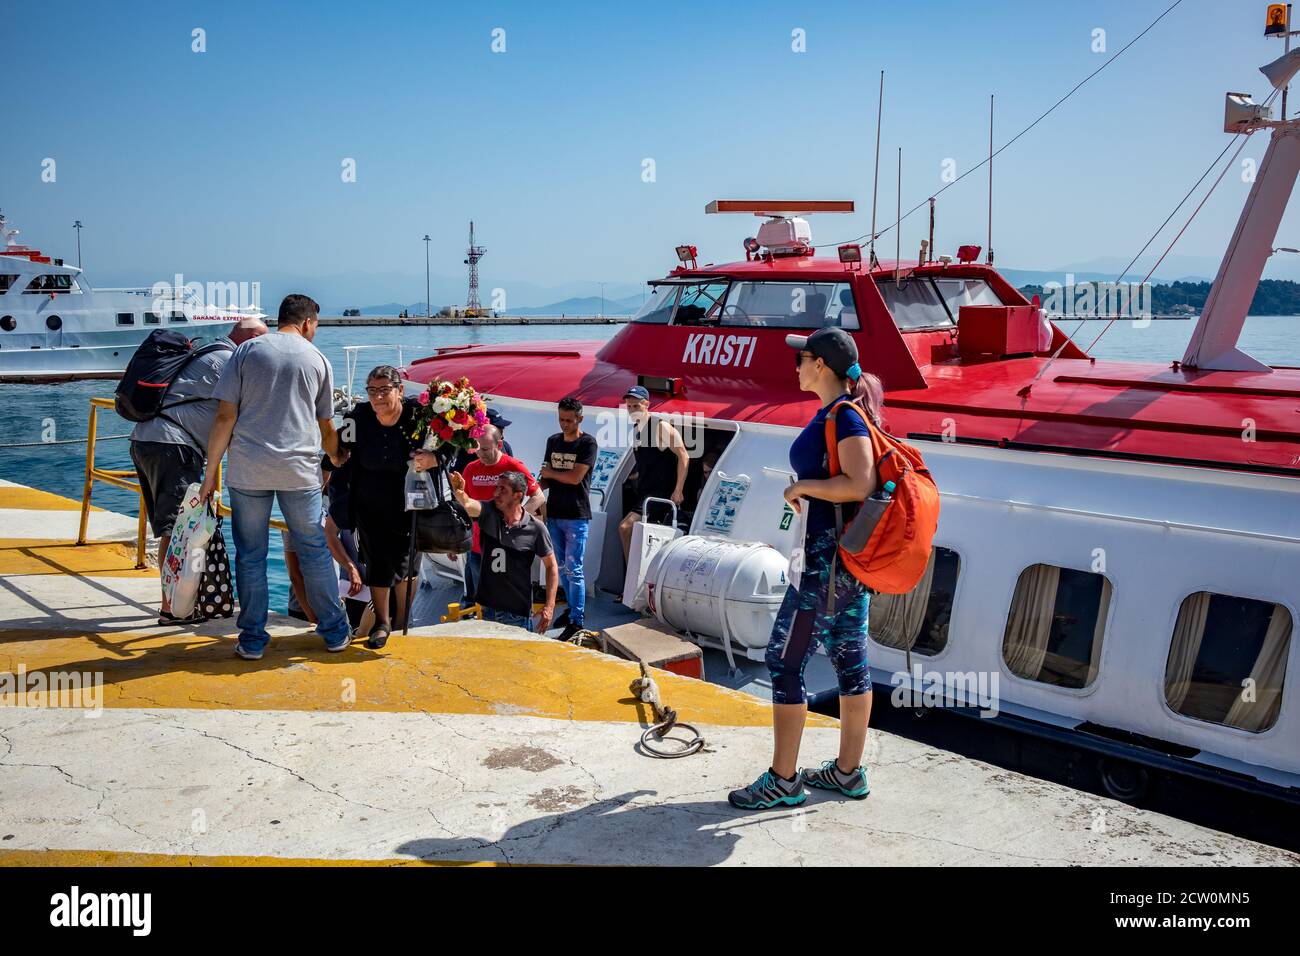 Corfu, Greece - July 20, 2019: Tourists get help getting out of the speed boat ferry coming from Saranda, Albania. Kerkira marina with the blue waters of Ionian Sea. Stock Photo